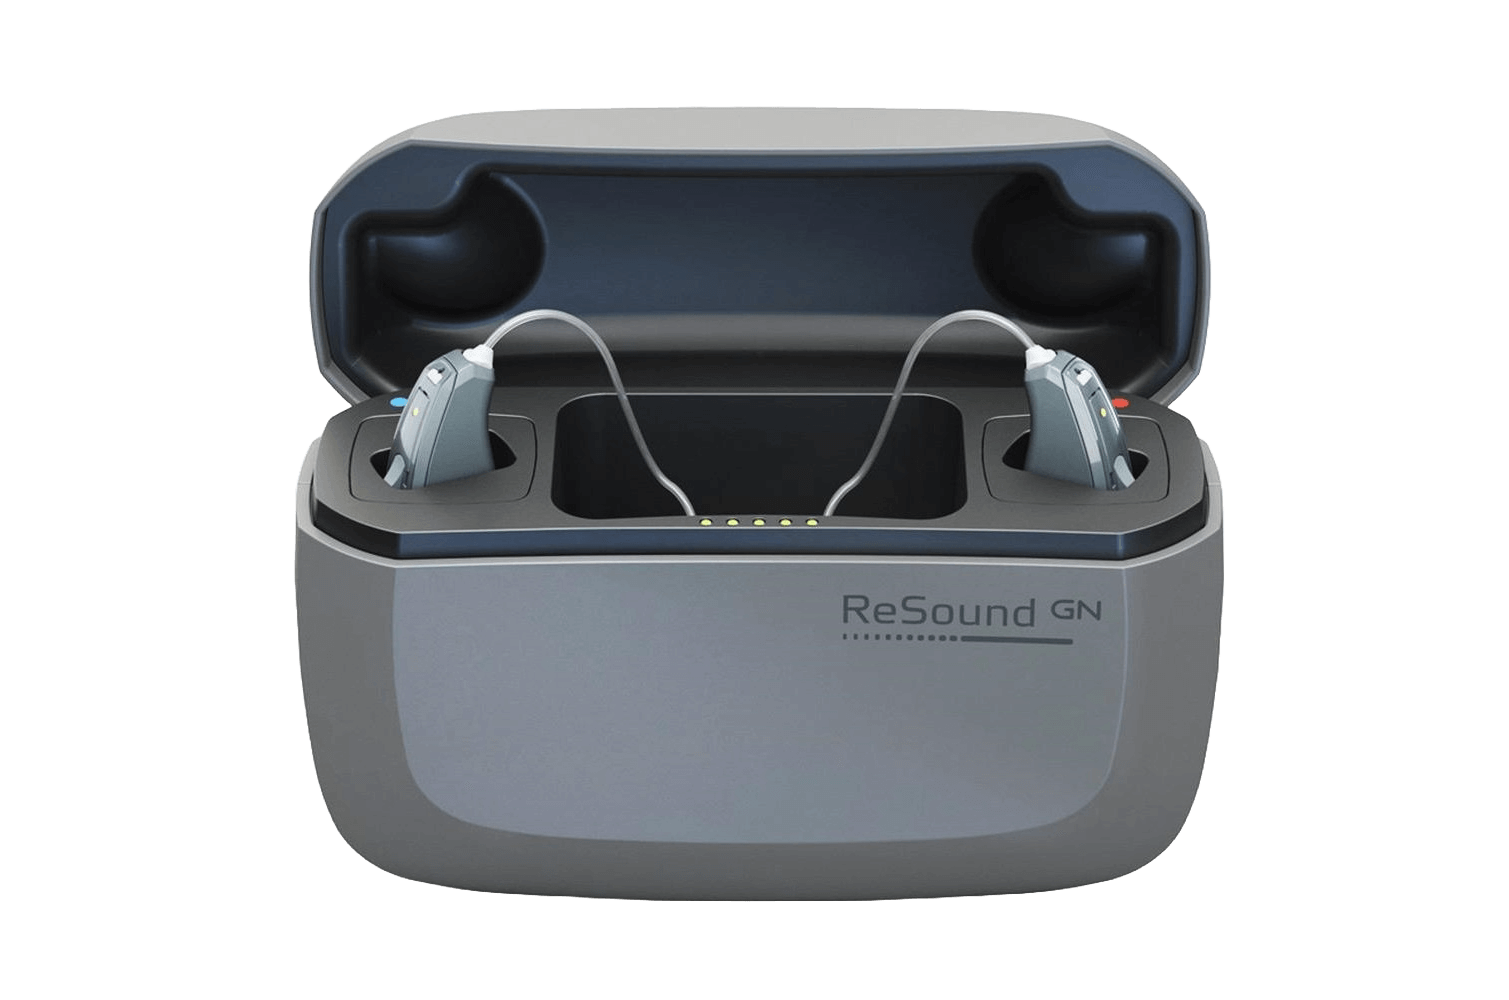 ReSound GN hearing aids in charger